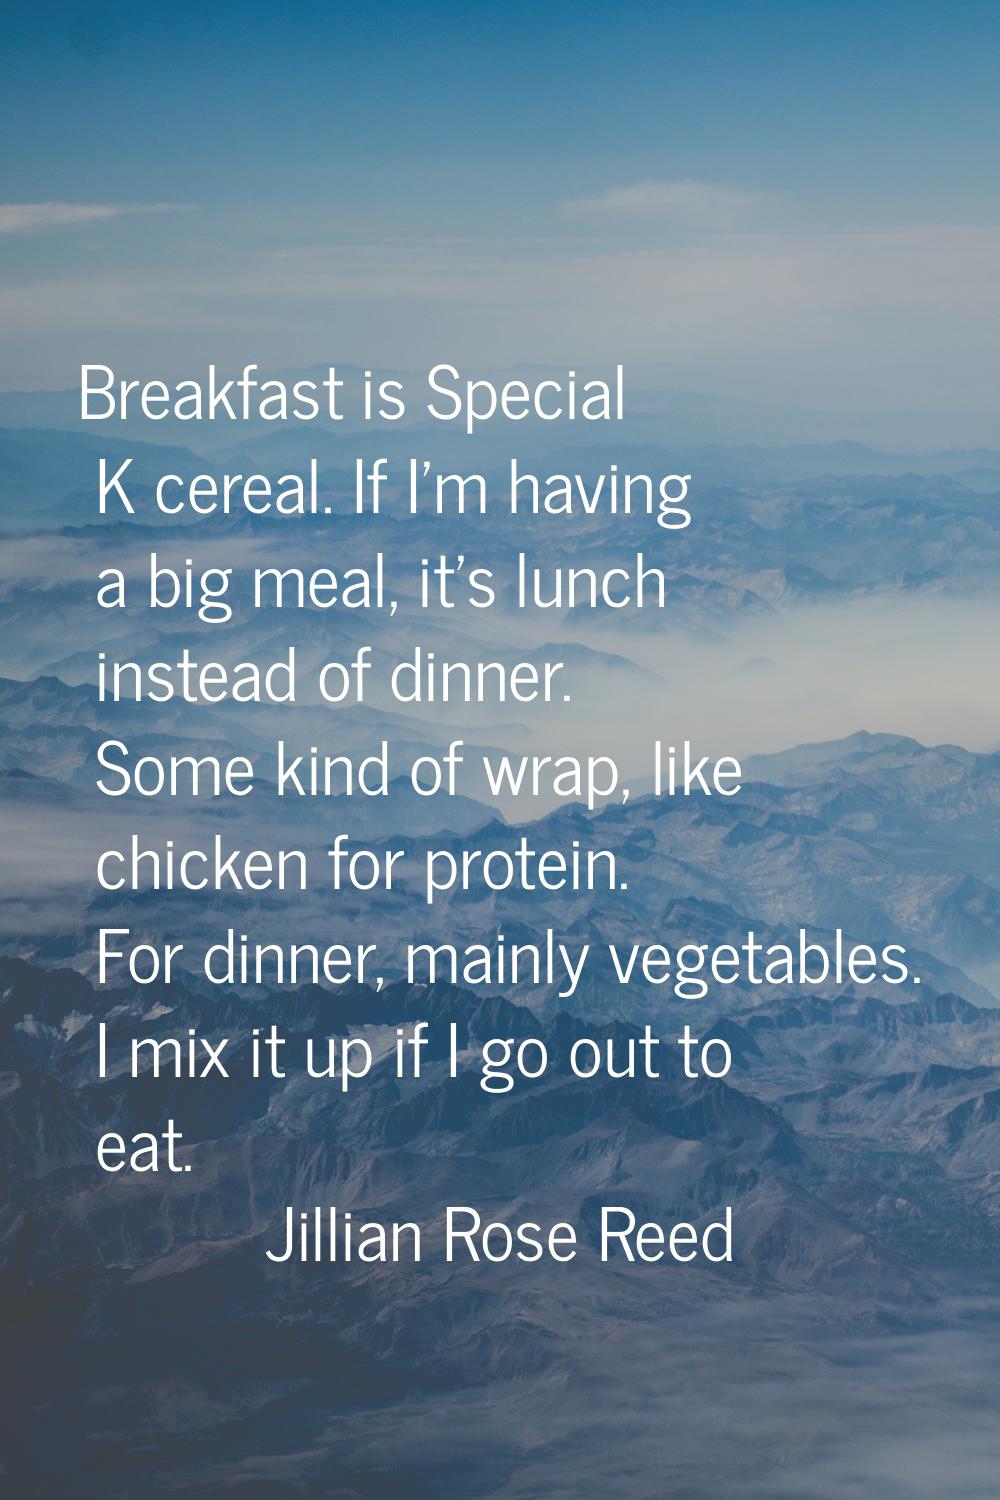 Breakfast is Special K cereal. If I'm having a big meal, it's lunch instead of dinner. Some kind of